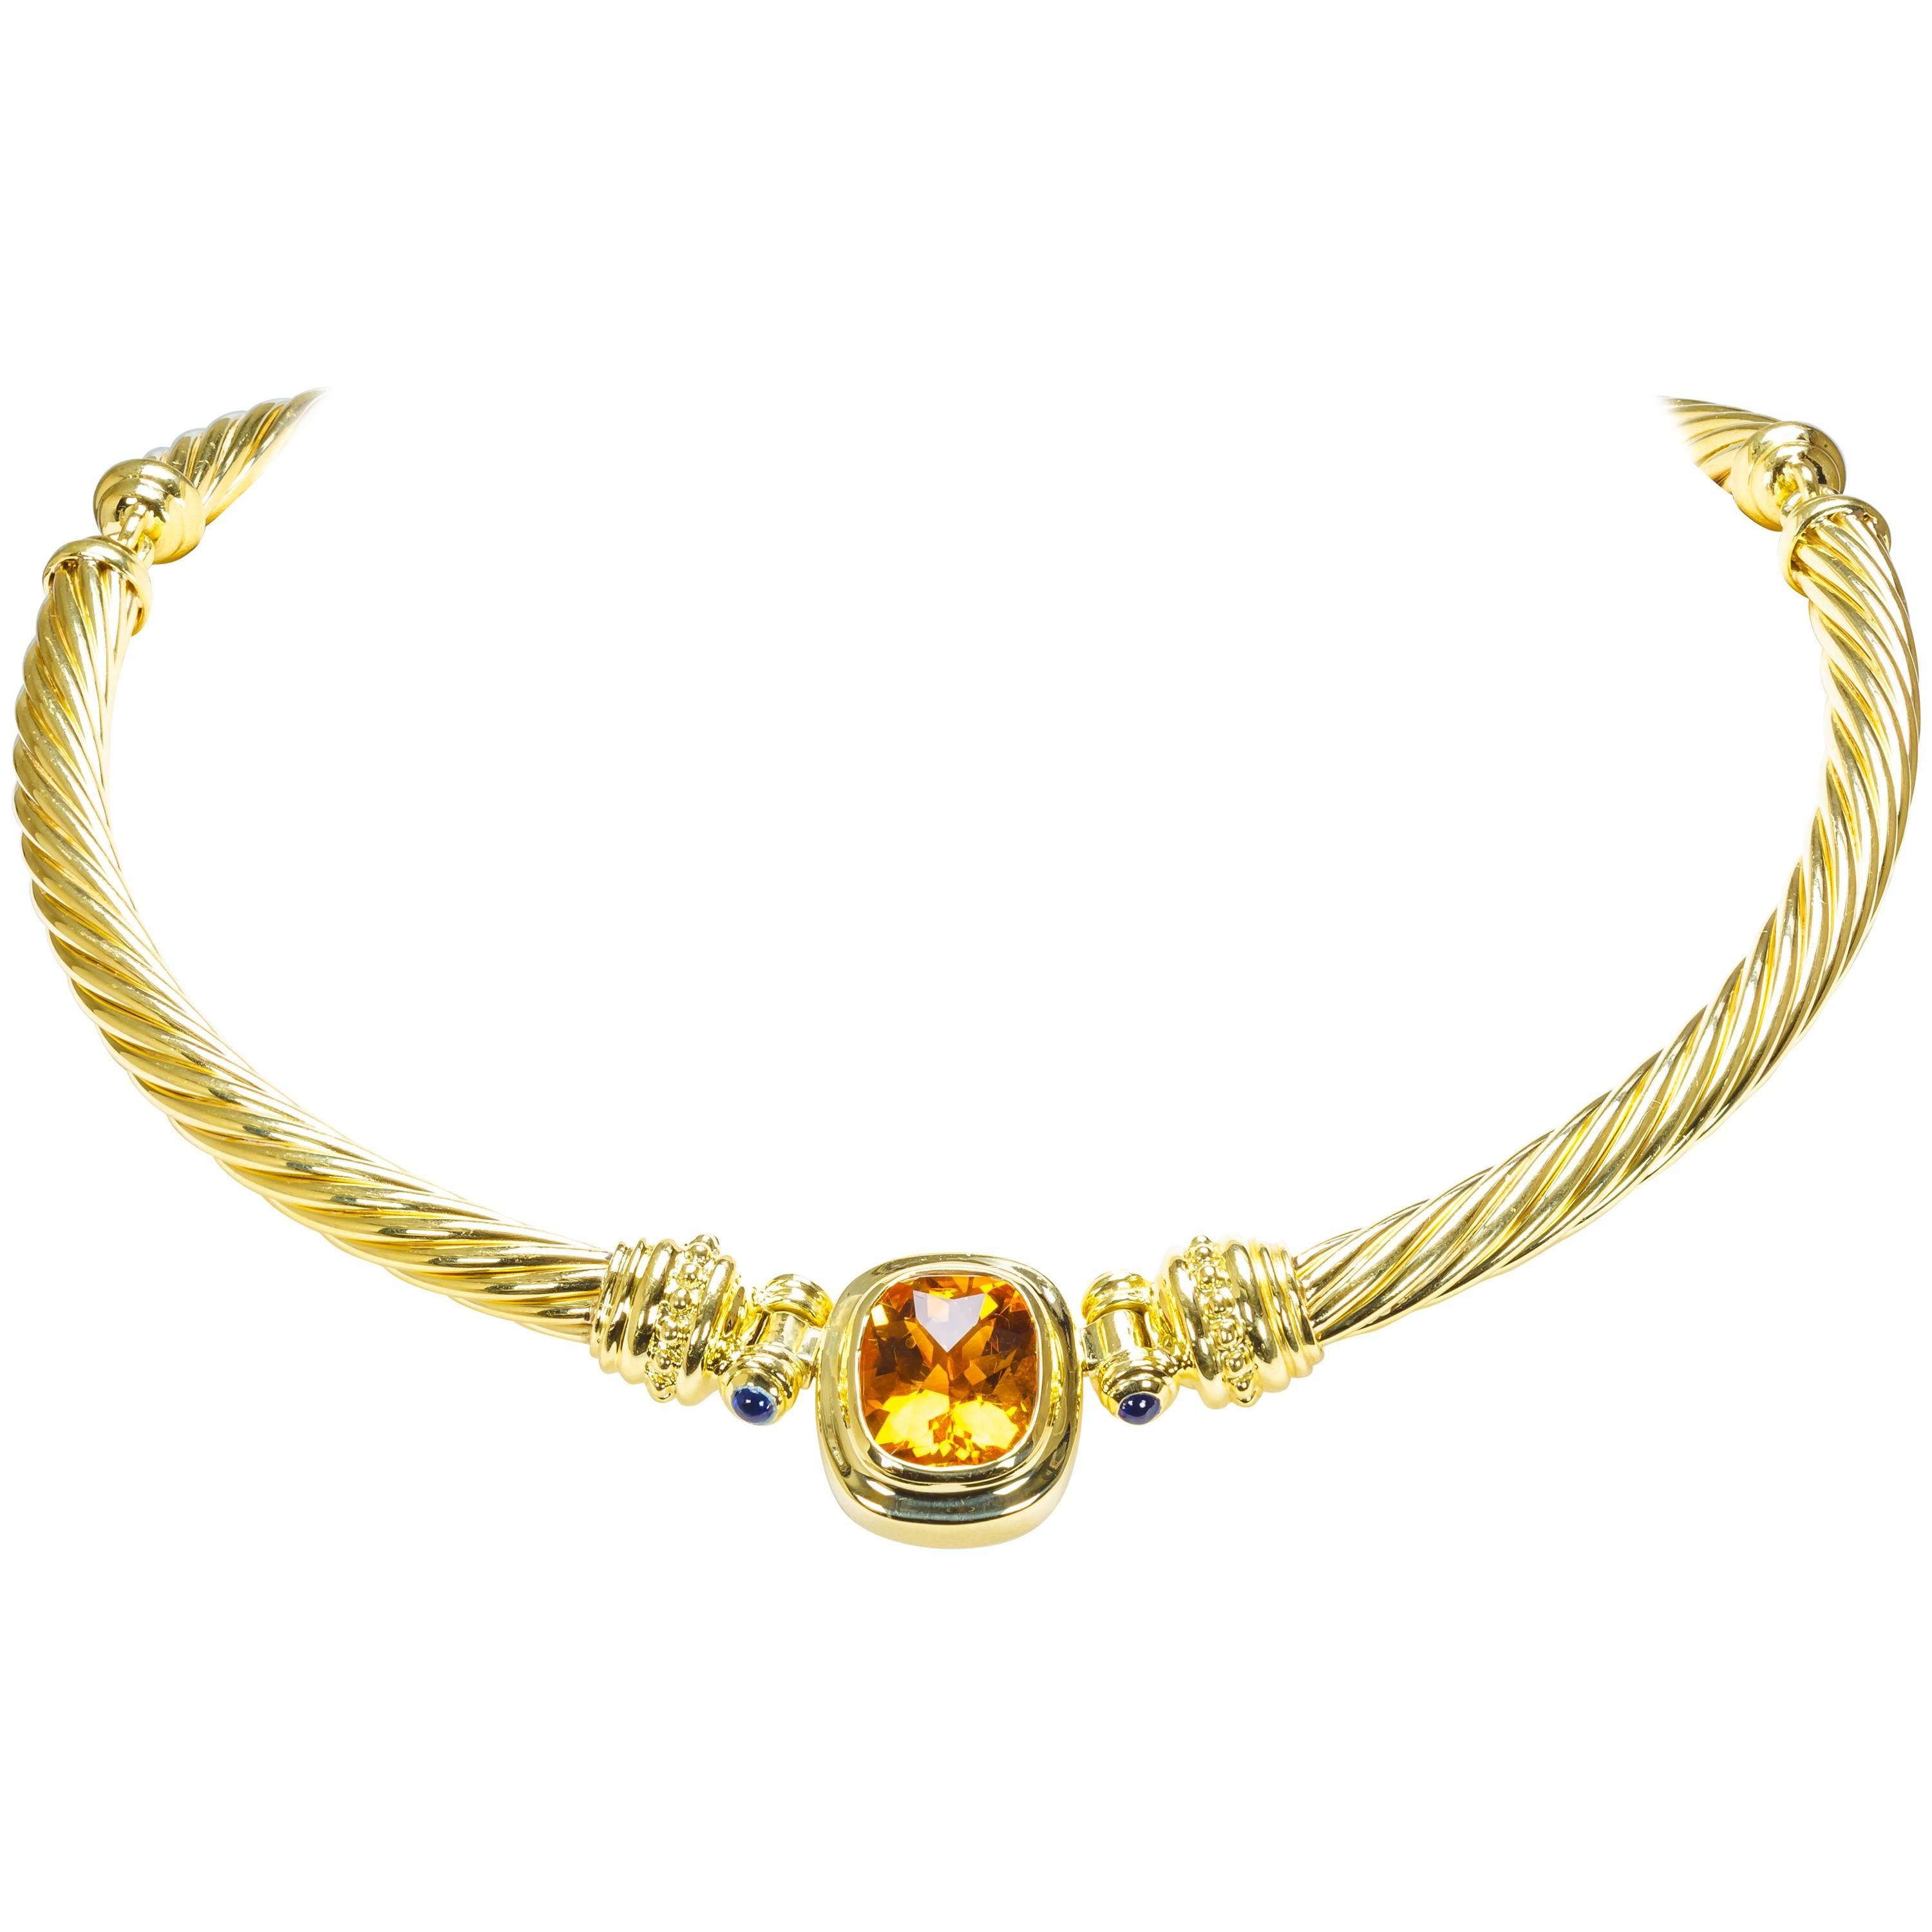 Vintage David Yurman 18k Yellow Gold Citrine and Sapphire Cable Necklace For Sale